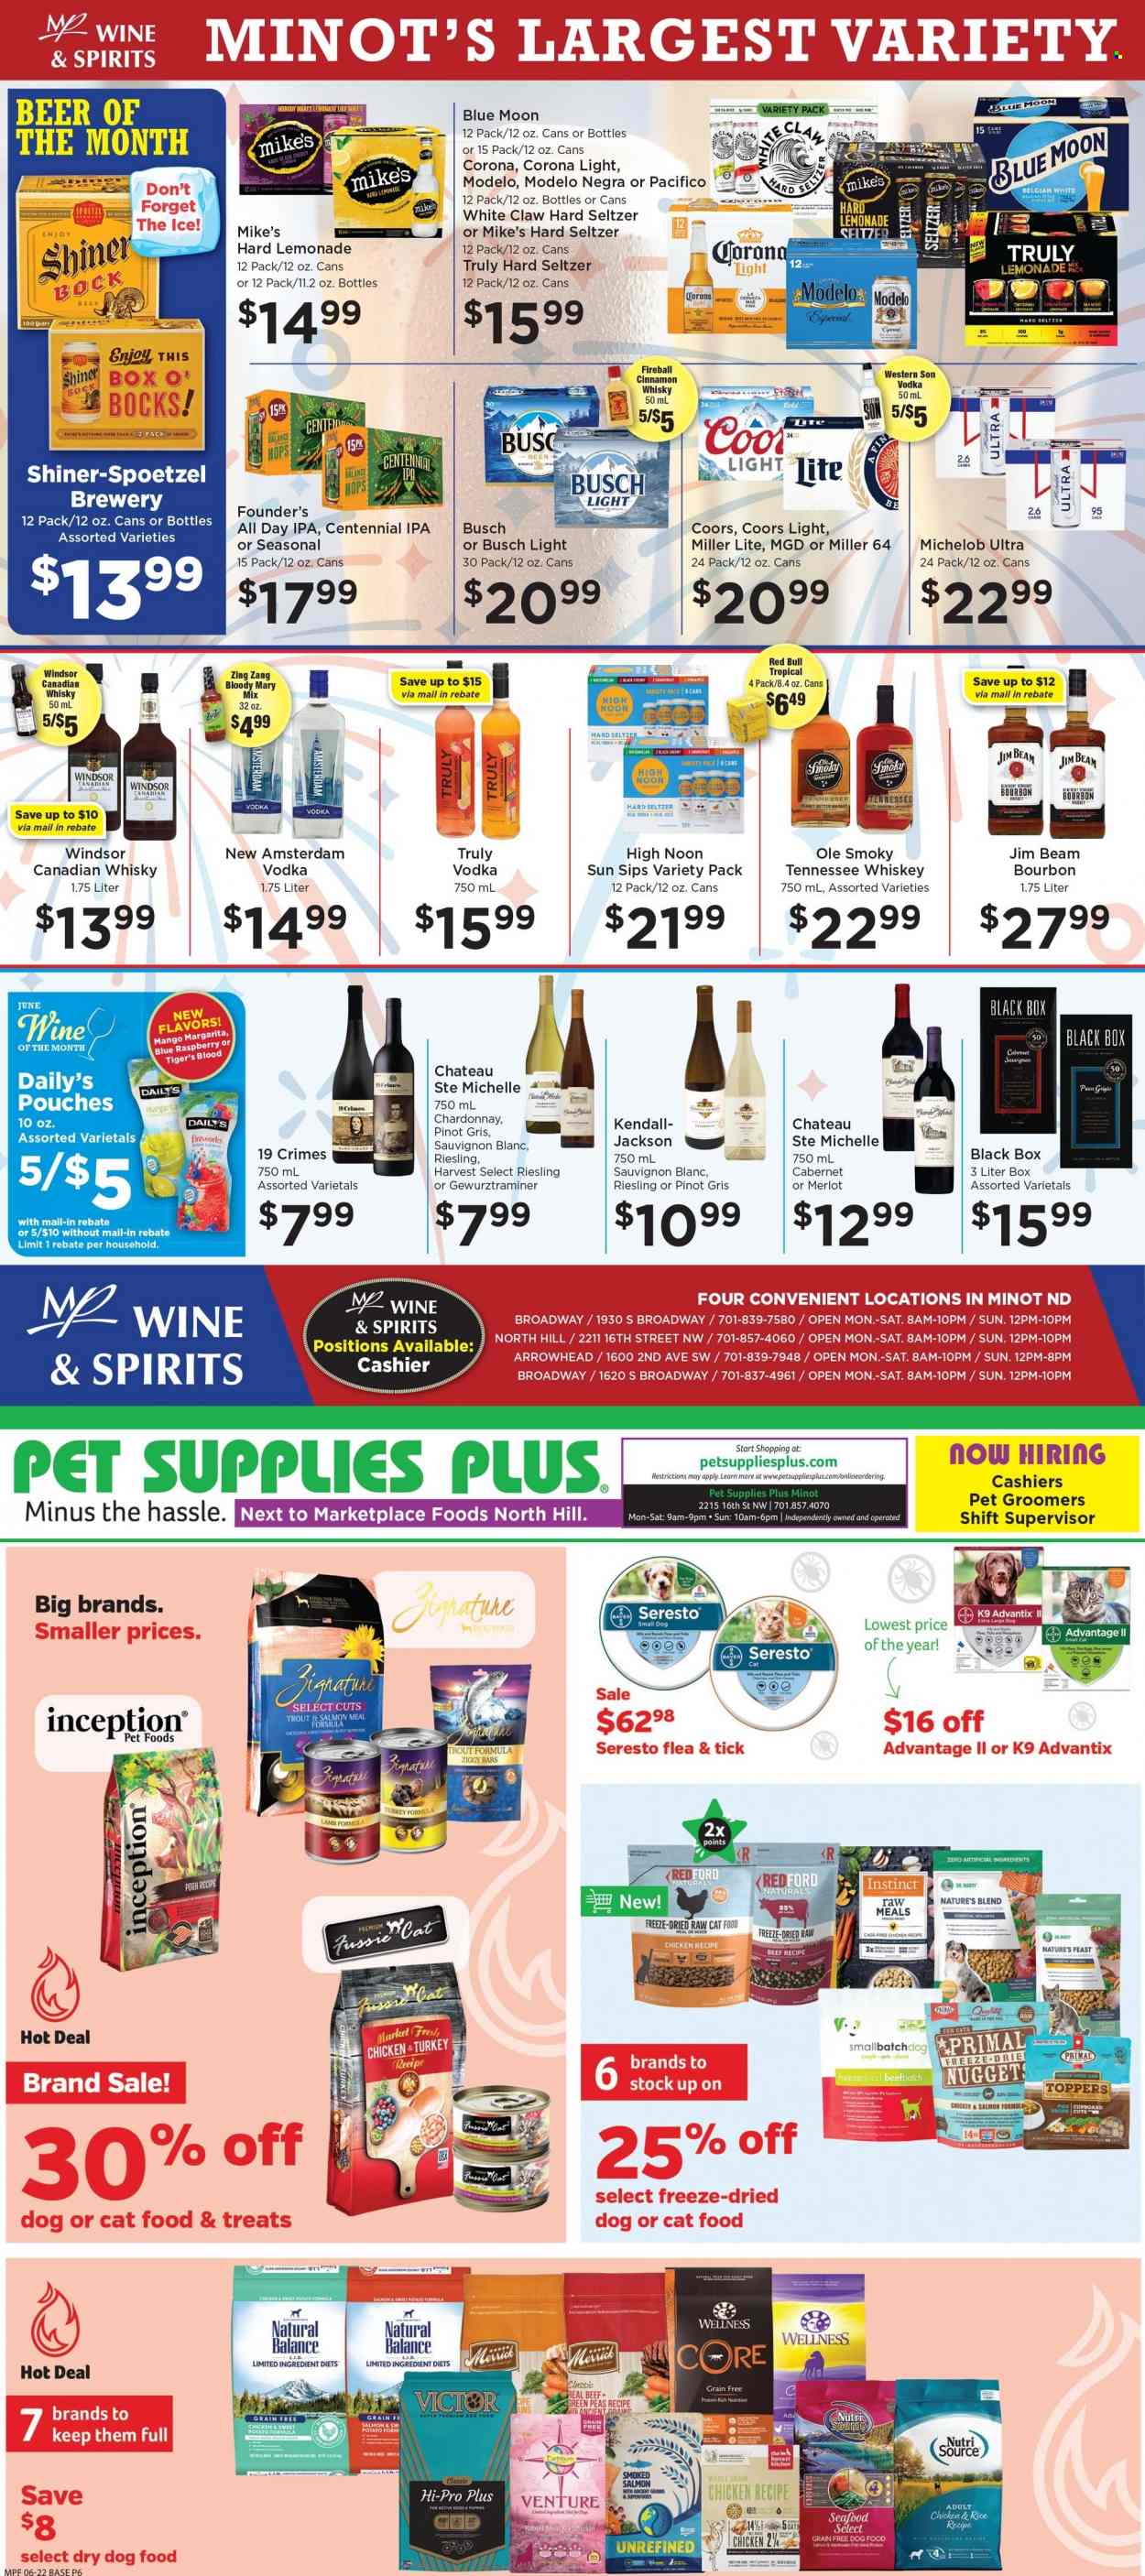 Marketplace Foods ad  - 06.22.2022 - 06.28.2022.